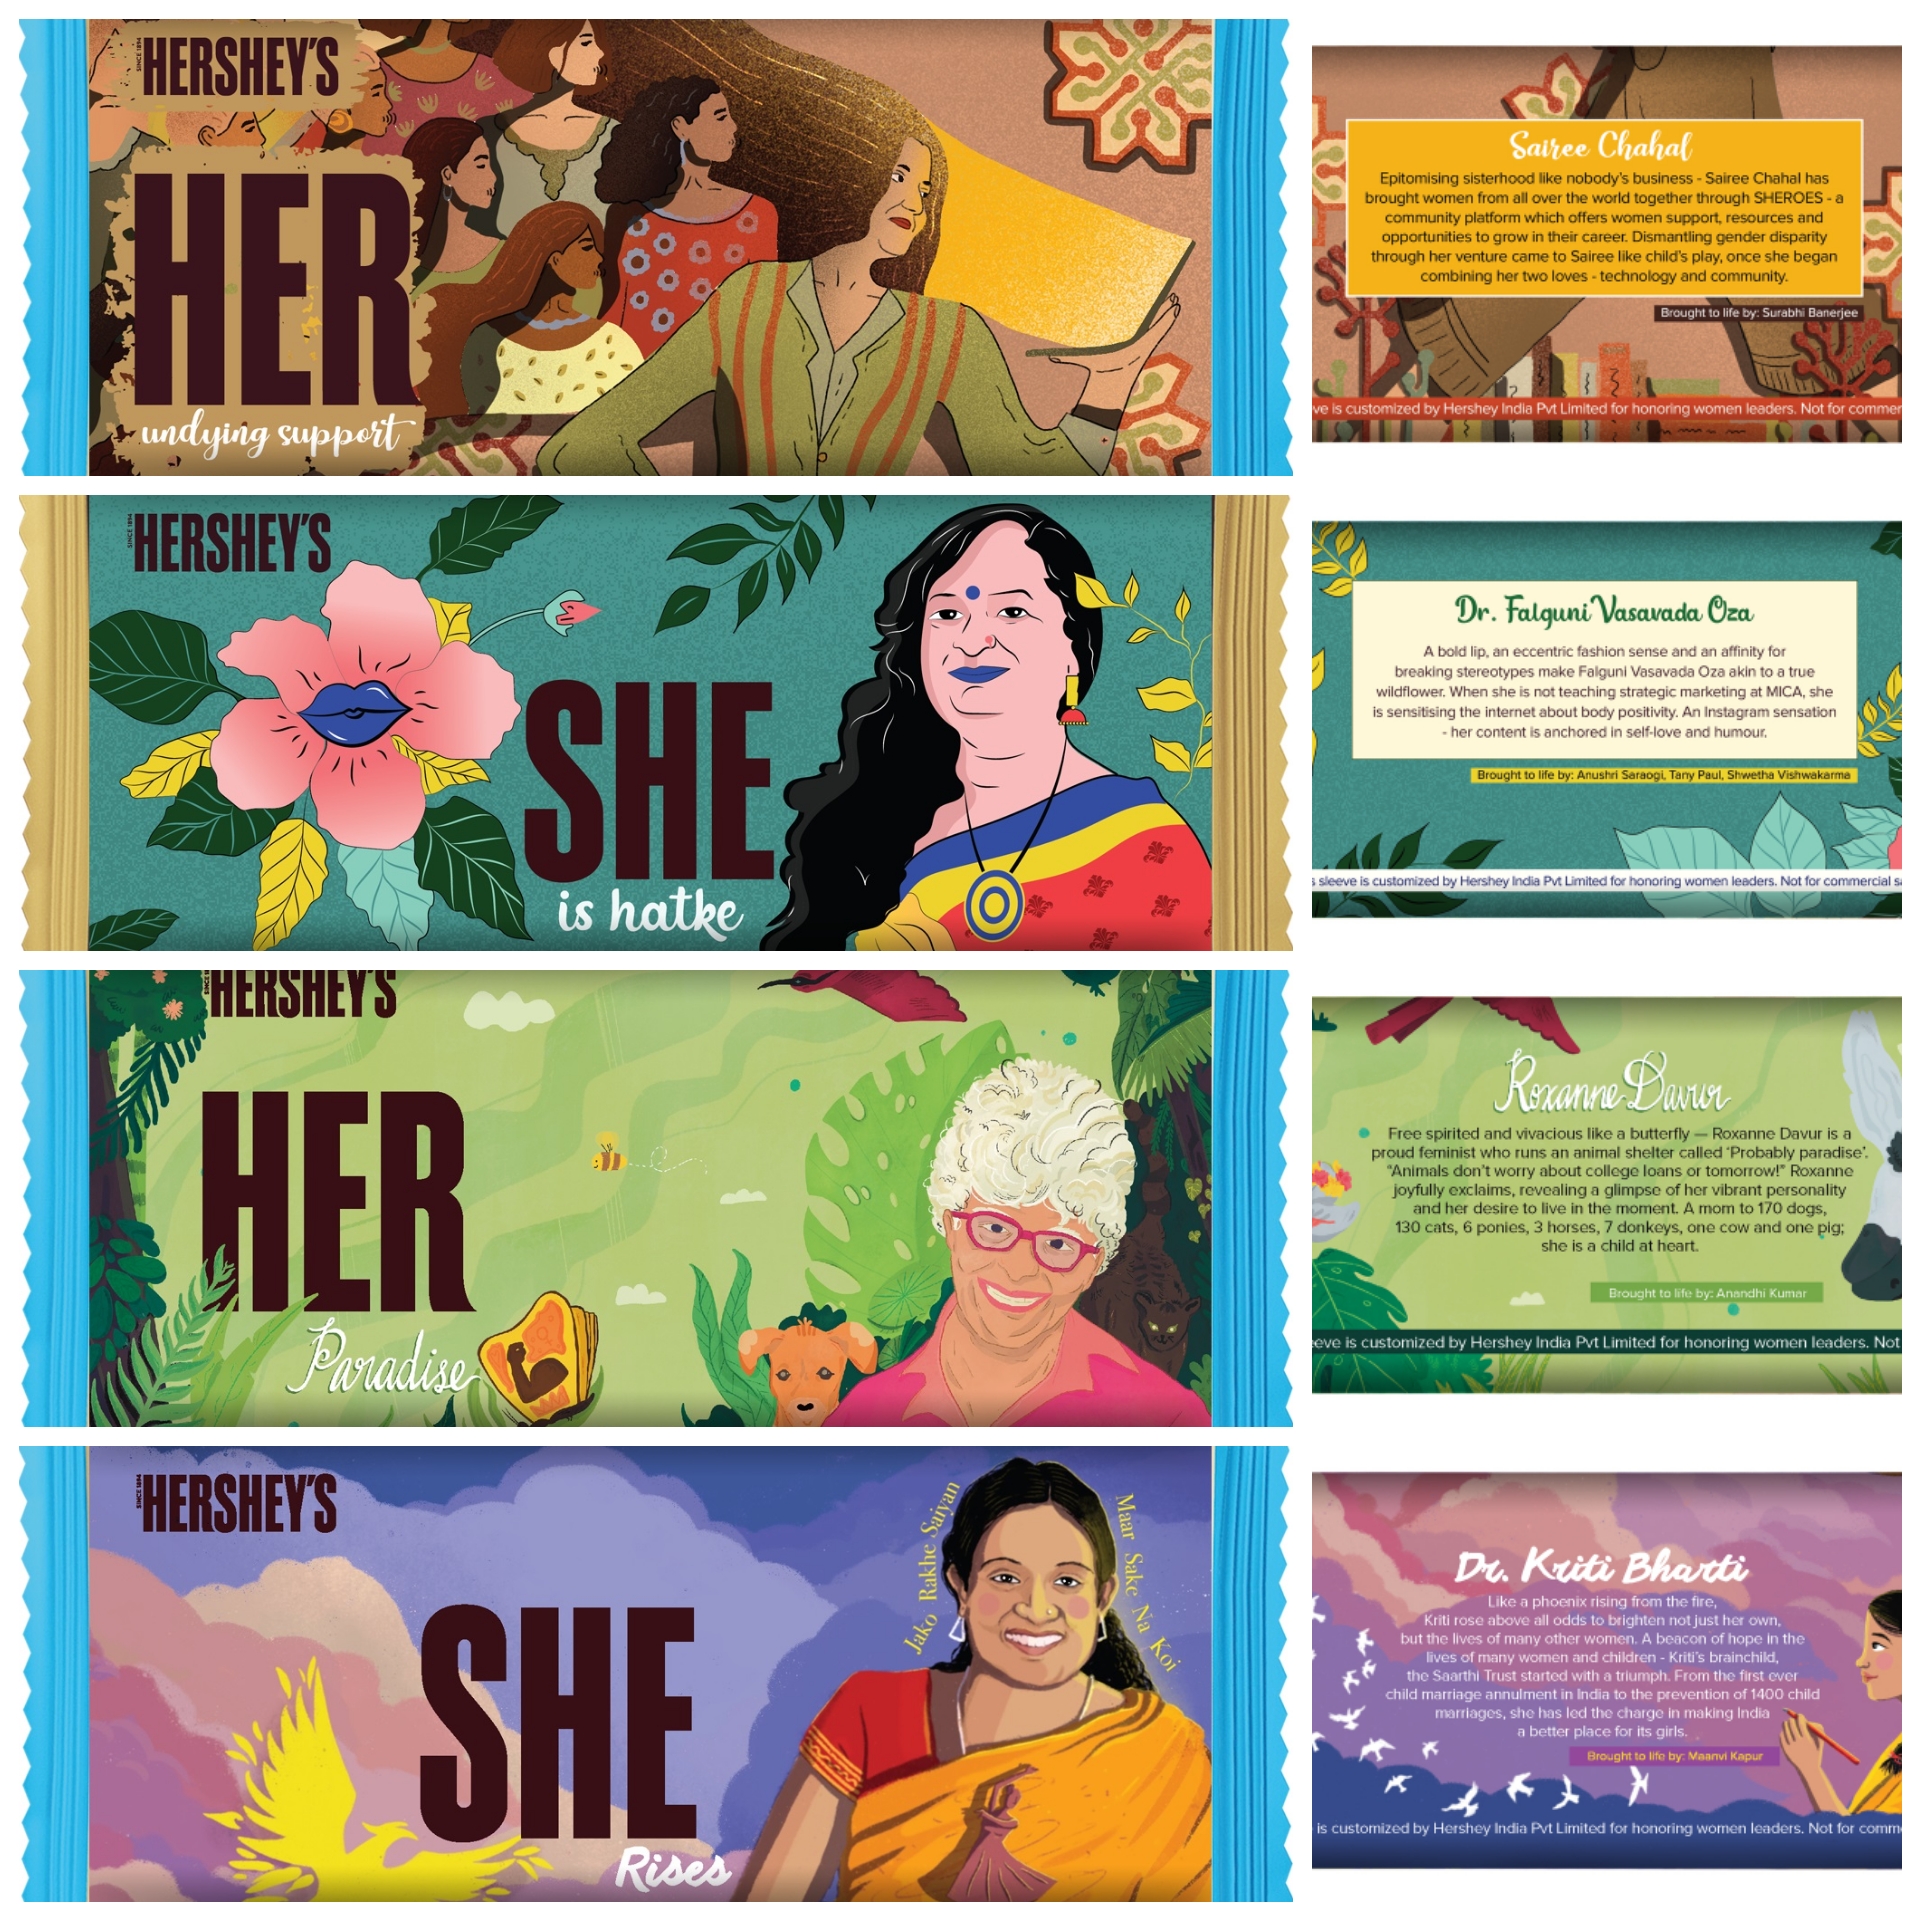 Hershey” celebrates women leaders from various walks of life through an  innovative “HER-SHE” digital campaign